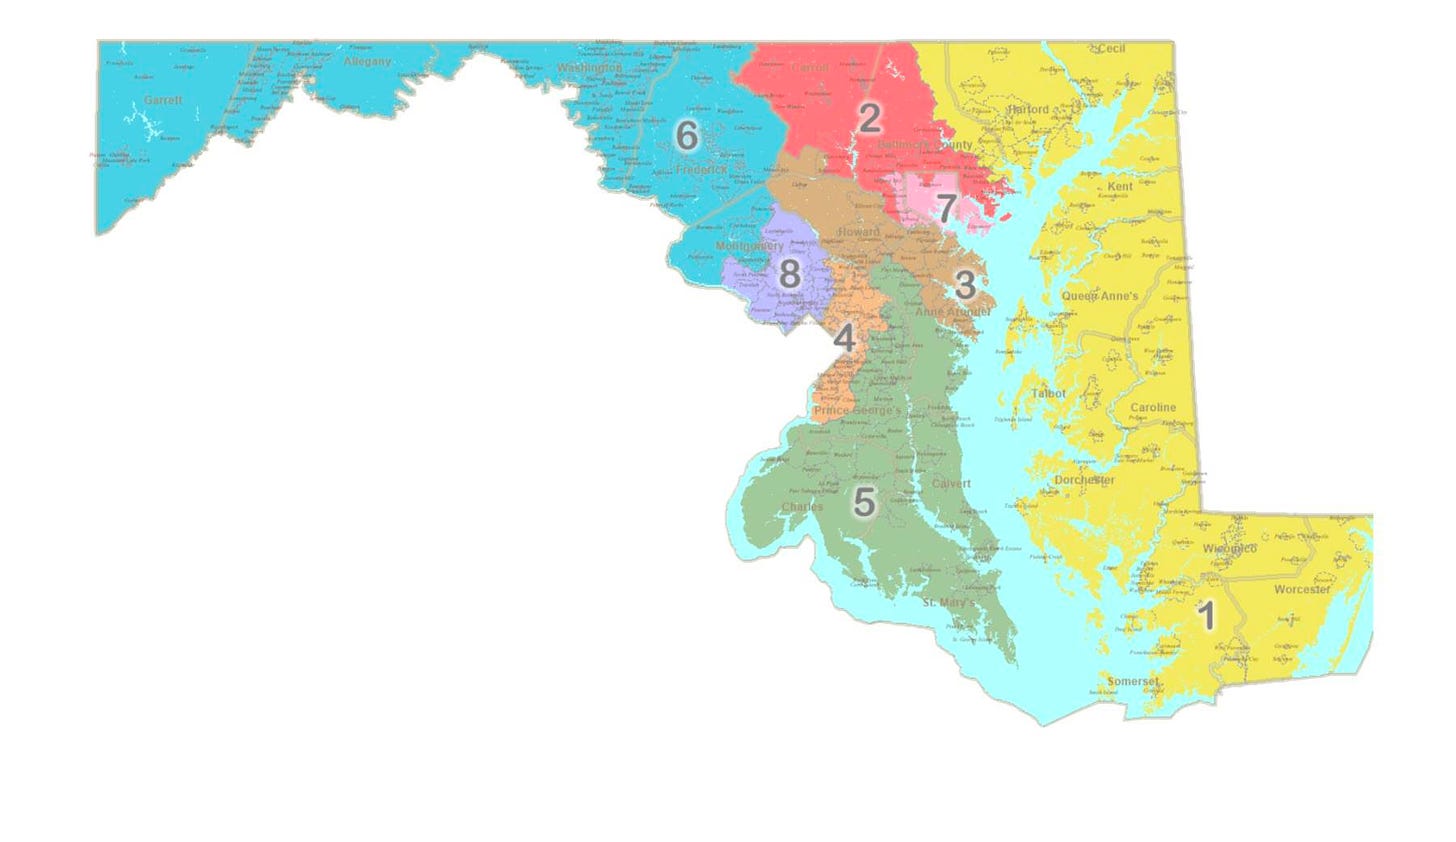 Judge defers ruling on whether to accept new Maryland congressional  district map, citing appeal, possible veto – Baltimore Sun